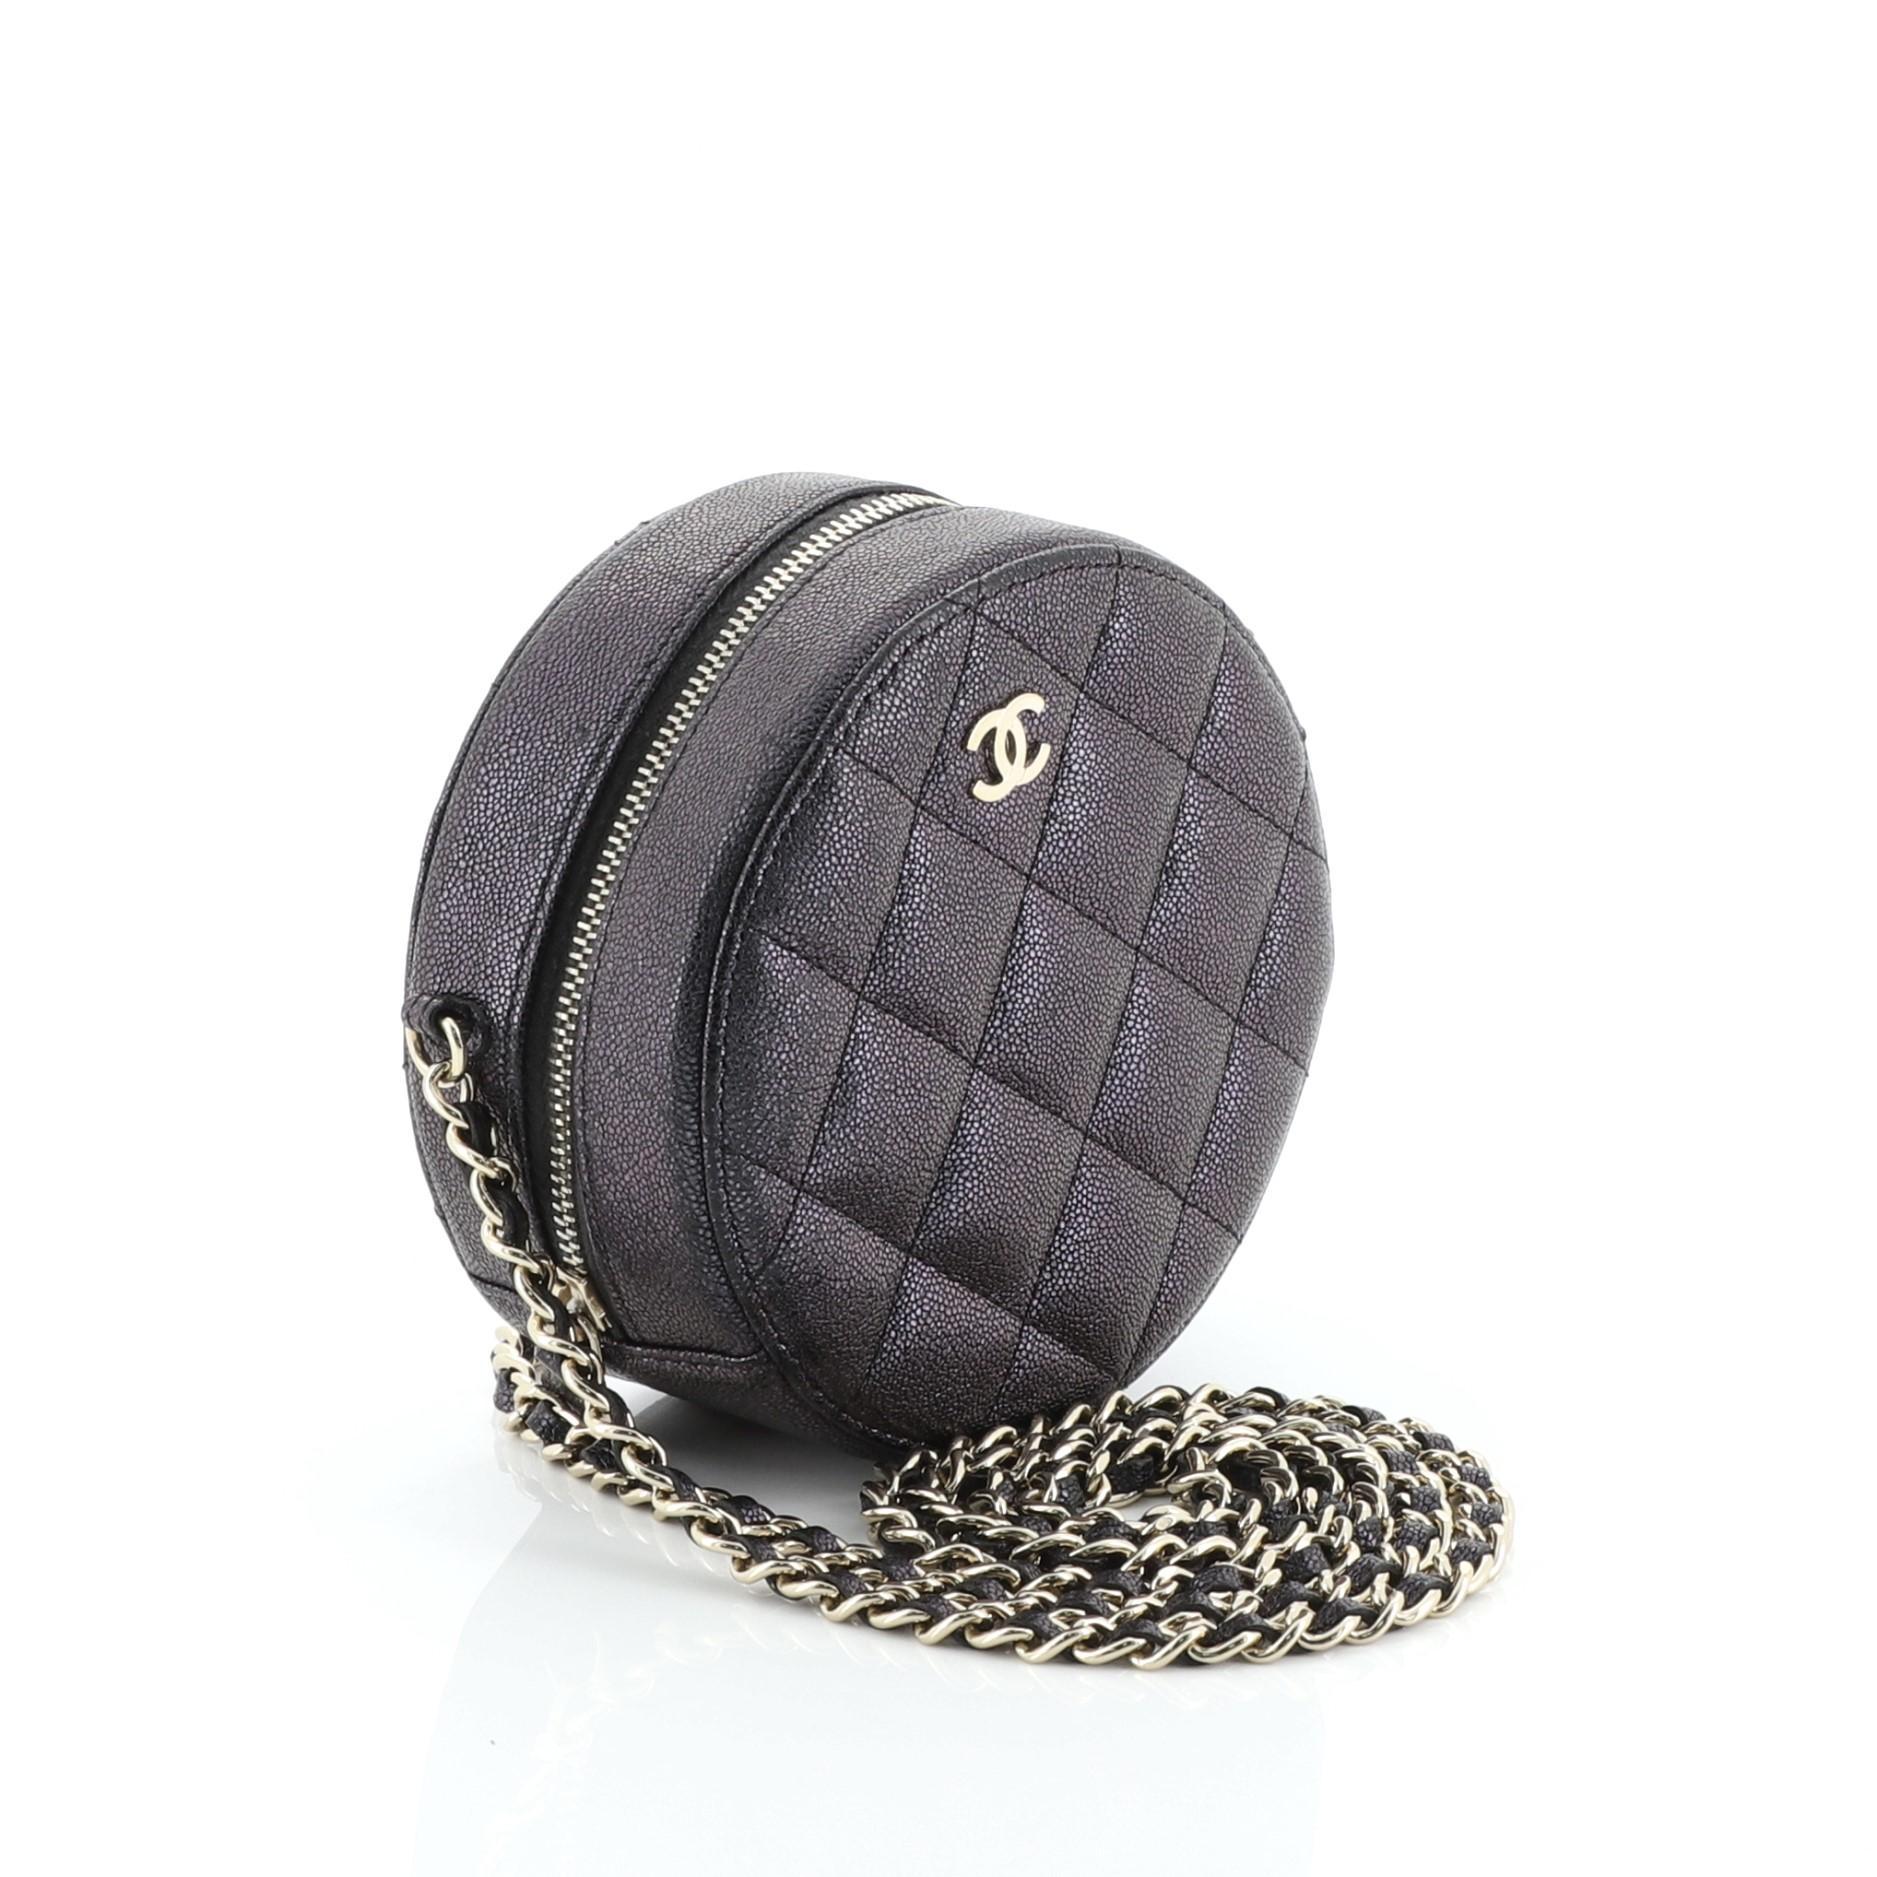 This Chanel Round Clutch with Chain Quilted Caviar Mini, crafted from green, purple and multicolor quilted caviar leather, features woven-in leather chain strap and gold-tone hardware. Its zip closure opens to a black fabric interior with slip